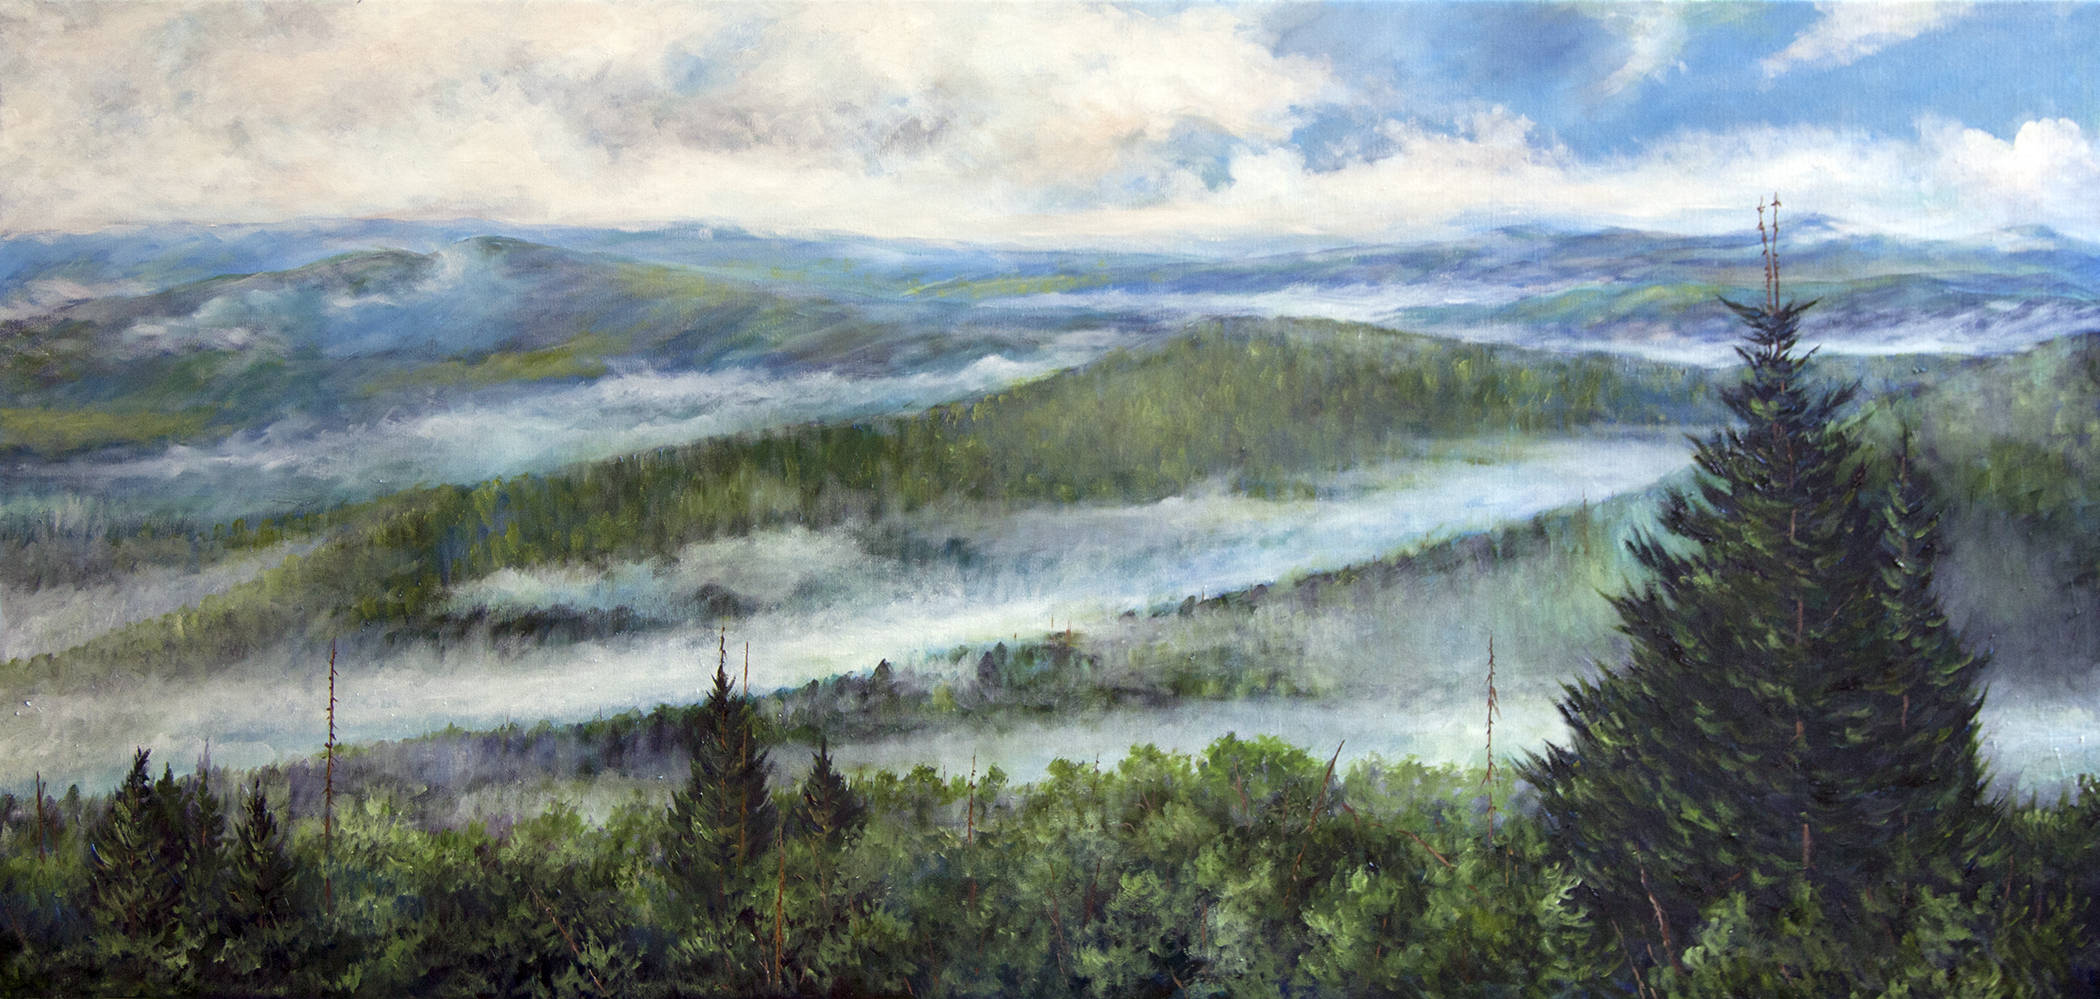 An Oil Painting Of The Great Smoky Mountains